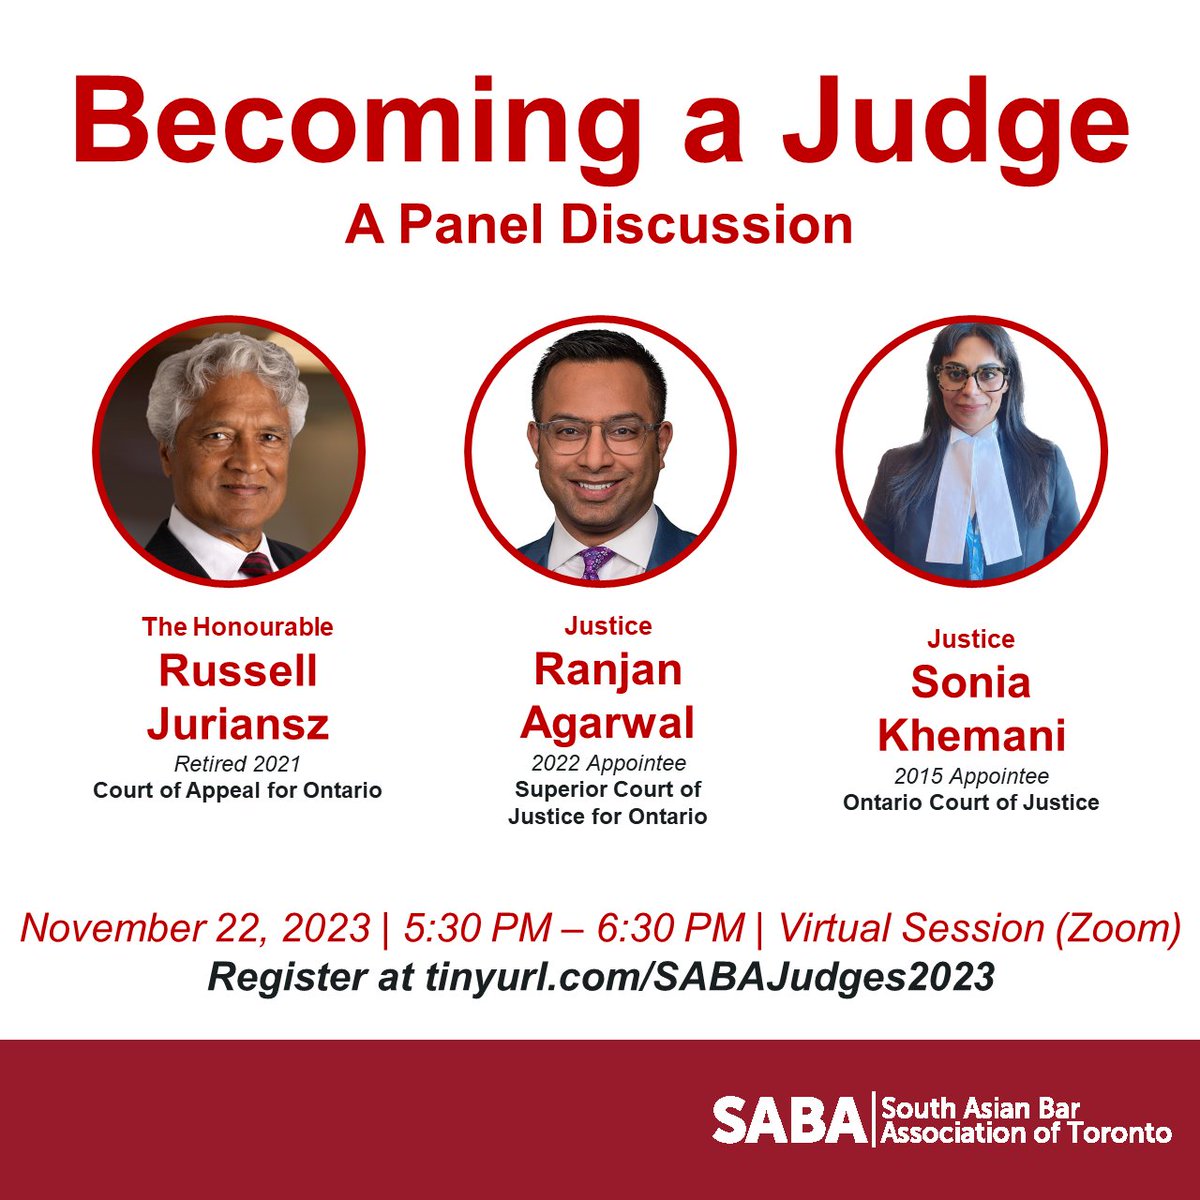 South Asian lawyers interested in judicial appointments are welcomed to a special virtual panel event on November 22 featuring current and former judges of the OCJ, ONSC, and ONCA. Register here: tinyurl.com/SABAJudges2023